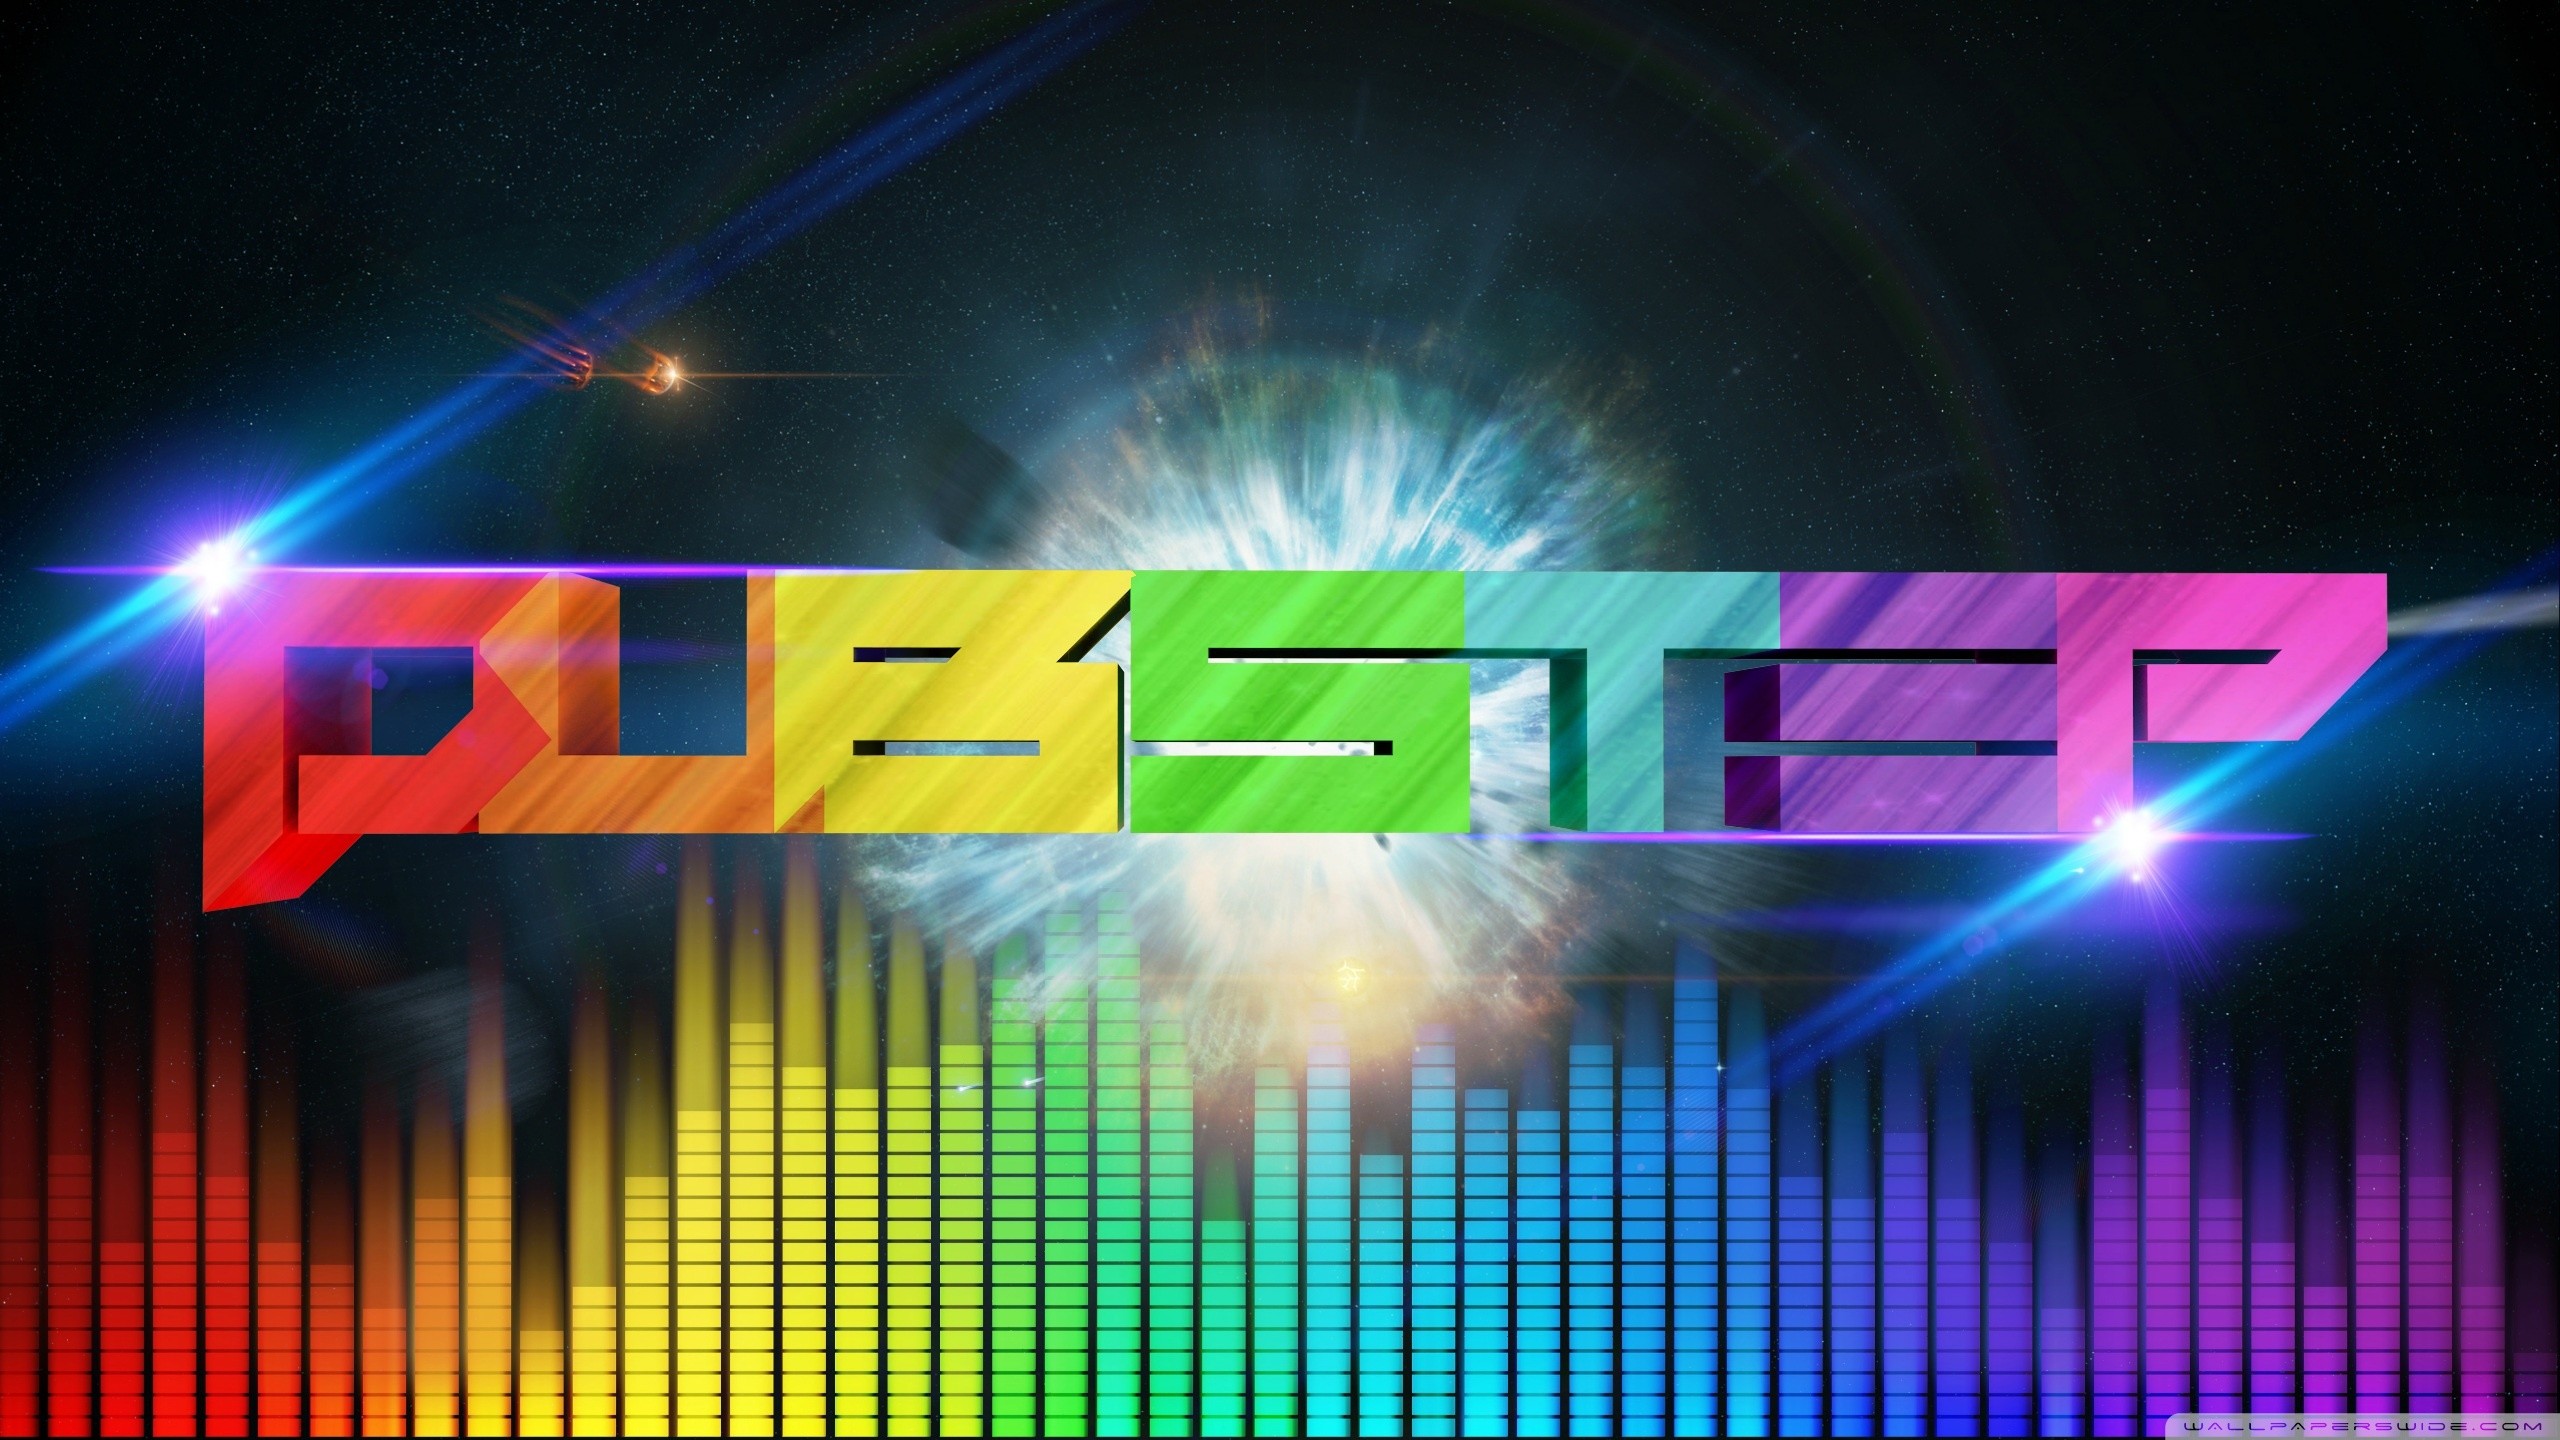 2560x1440 Dubstep Wallpapers Full HD (52 Wallpapers)